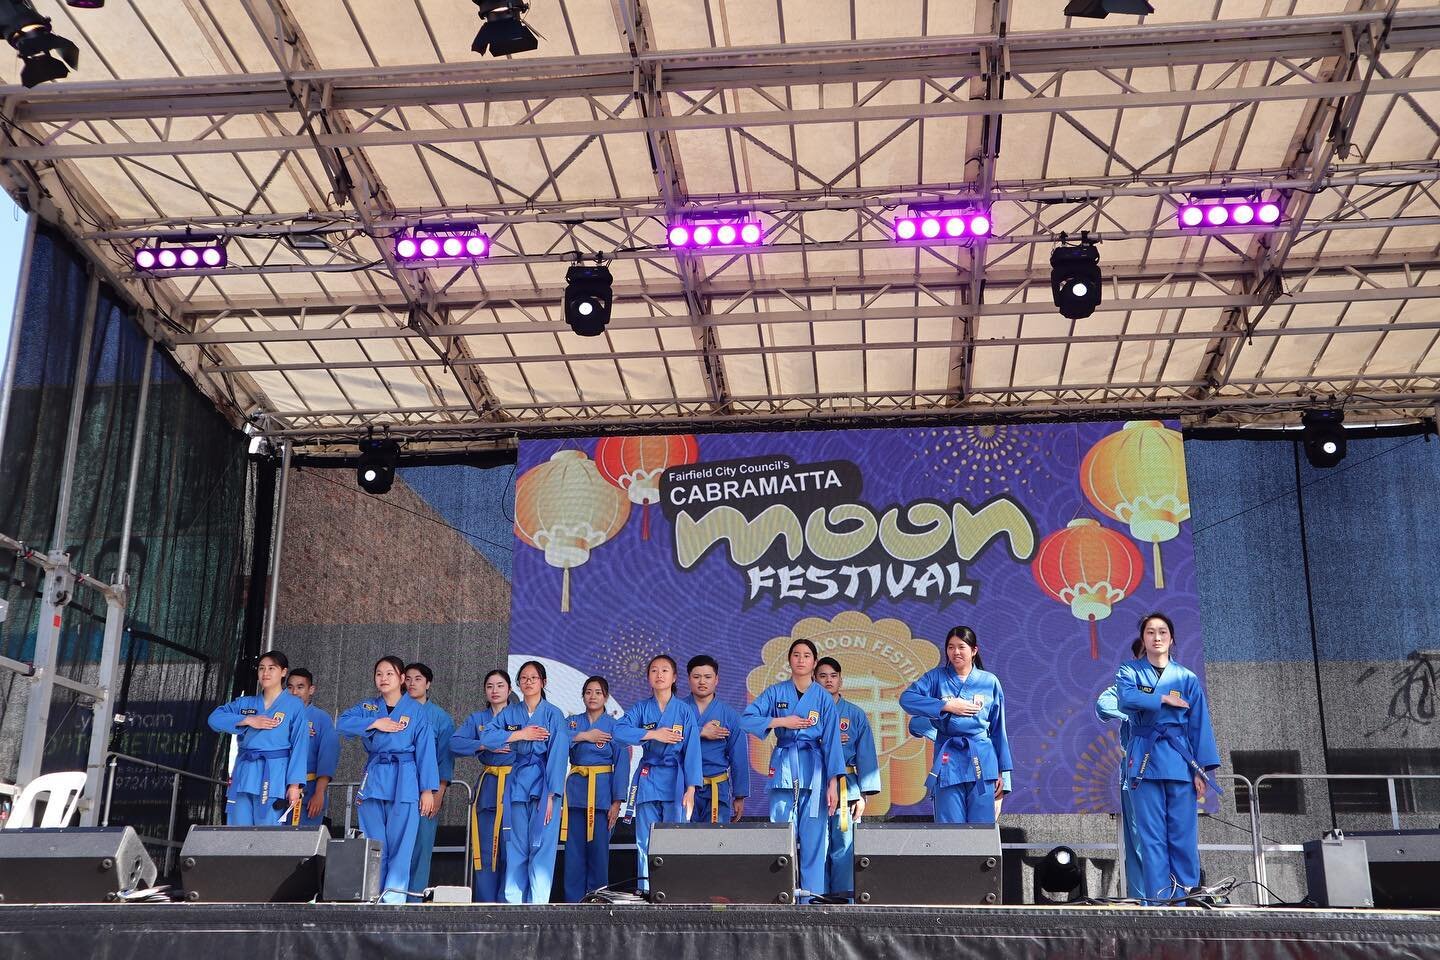 First demo post covid completed! 🙌🏼 

Thank you to the Cabramatta Moon Festival for having us perform and showcase Vovinam! 🥳

Next up is Canterbury-Bankstown Children&rsquo;s Festival held in Revesby - come show your support! 🤩